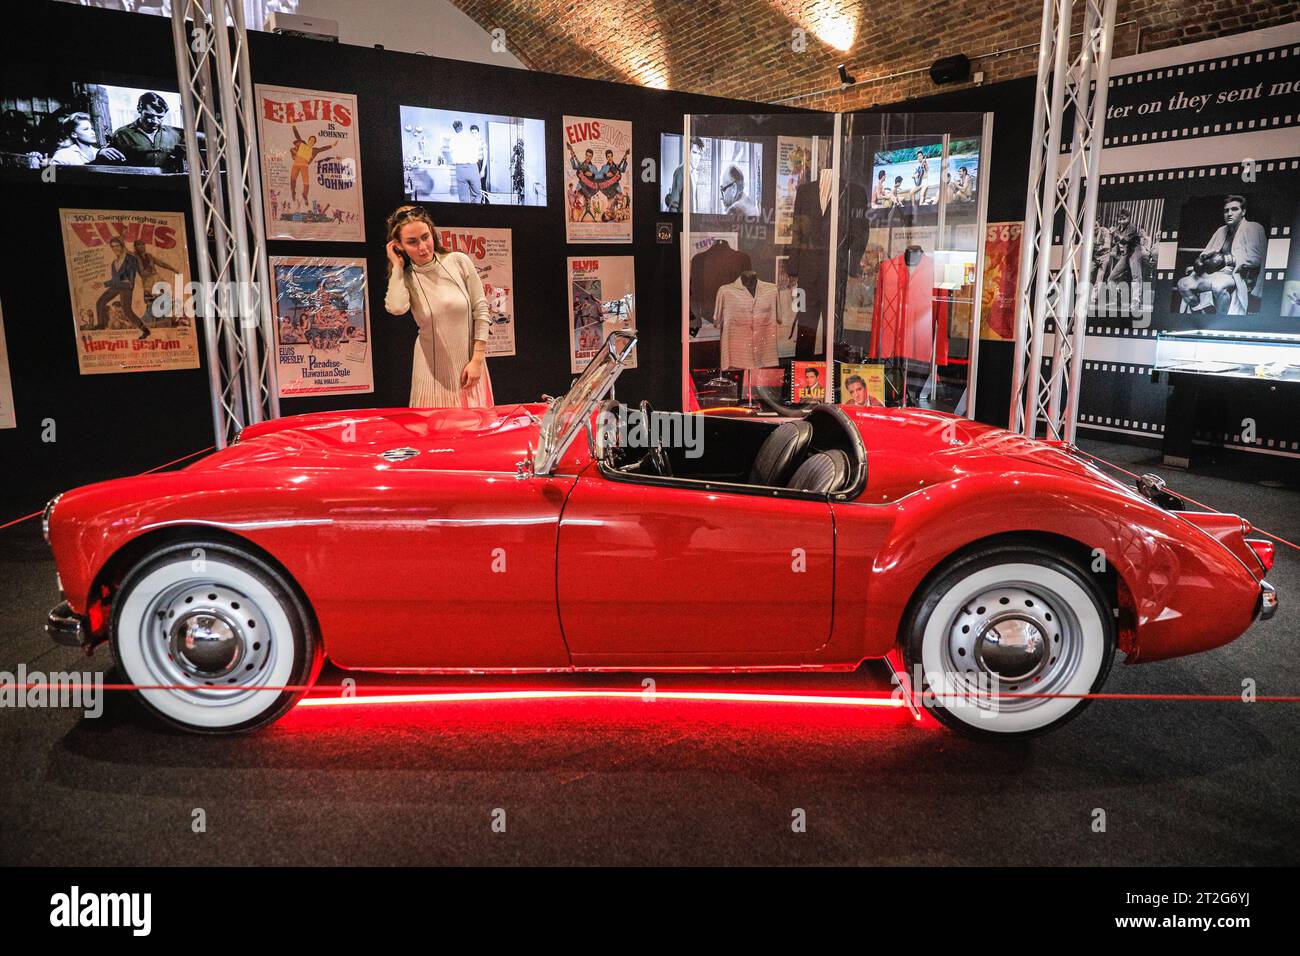 London, UK. 19th Oct, 2023. A visitor poses with Elvis' 1960 MGA 1600 MKI, the only one of Elvis' personal cars that ended up in one of his movies, used in the 1961 film 'Blue Hawaii'. The 'Direct from Graceland: Elvis' exhibition features over 400 artefacts and iconic belongings owned by Elvis, direct from the icon's Graceland home in Memphis, Tennessee. The exhibition opens on Oct 20 at the Arches London Bridge venue in Bermondsey Street. Credit: Imageplotter/Alamy Live News Stock Photo